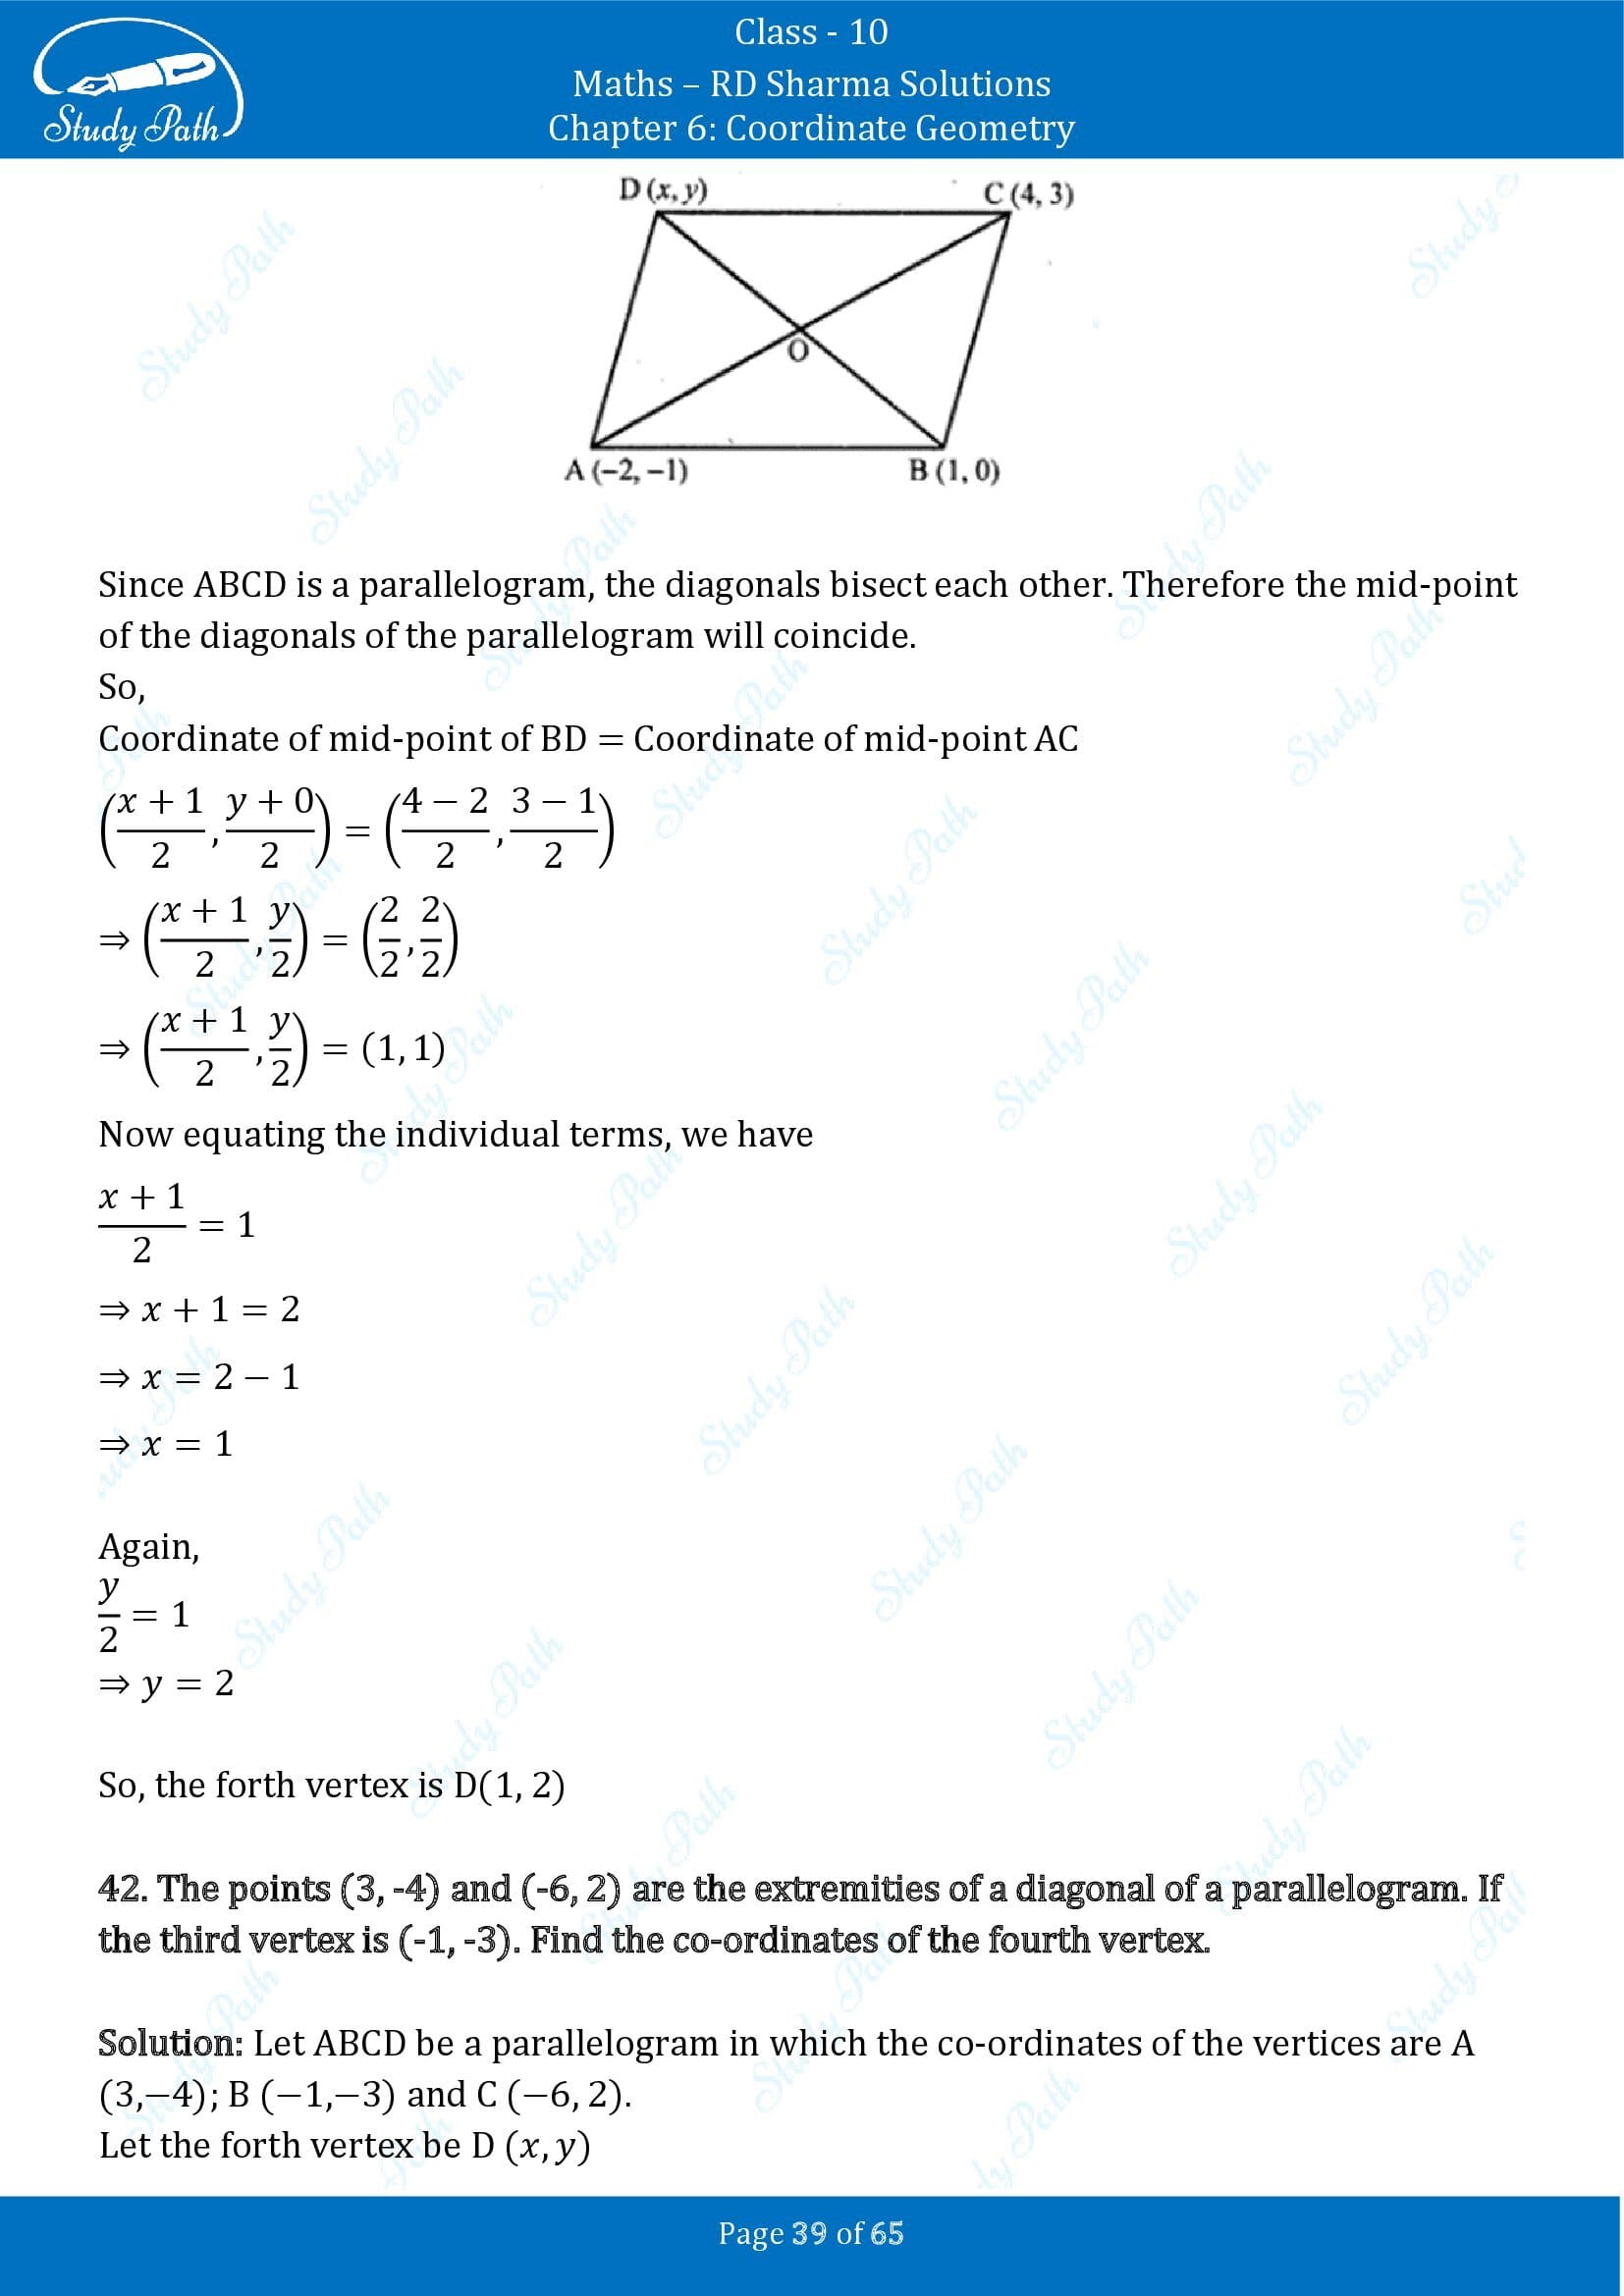 RD Sharma Solutions Class 10 Chapter 6 Coordinate Geometry Exercise 6.3 00039